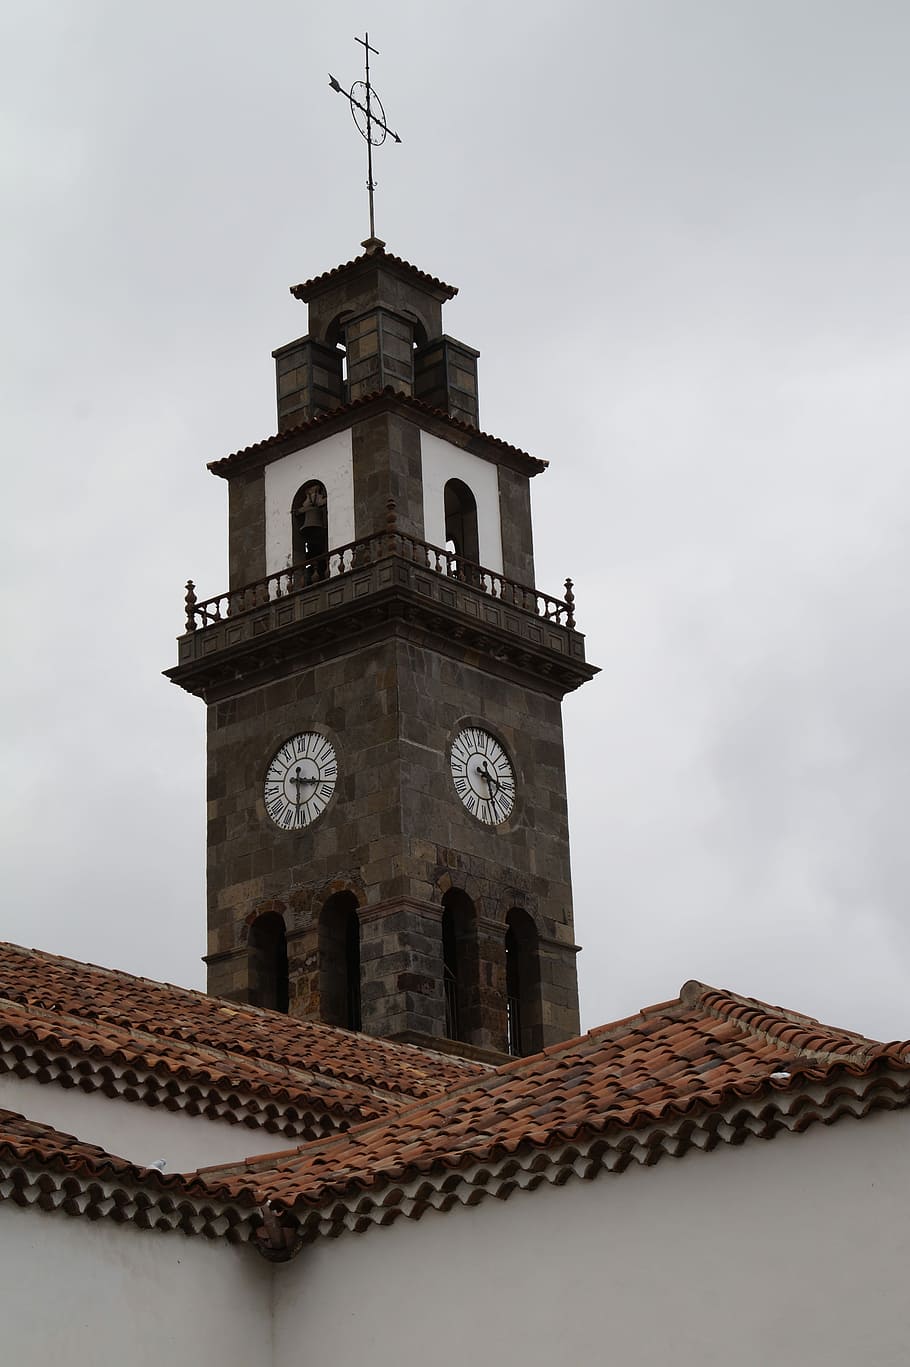 Steeple, Mediterranean, Tower, clock tower, tenerife, historically, architecture, church, sky, christianity